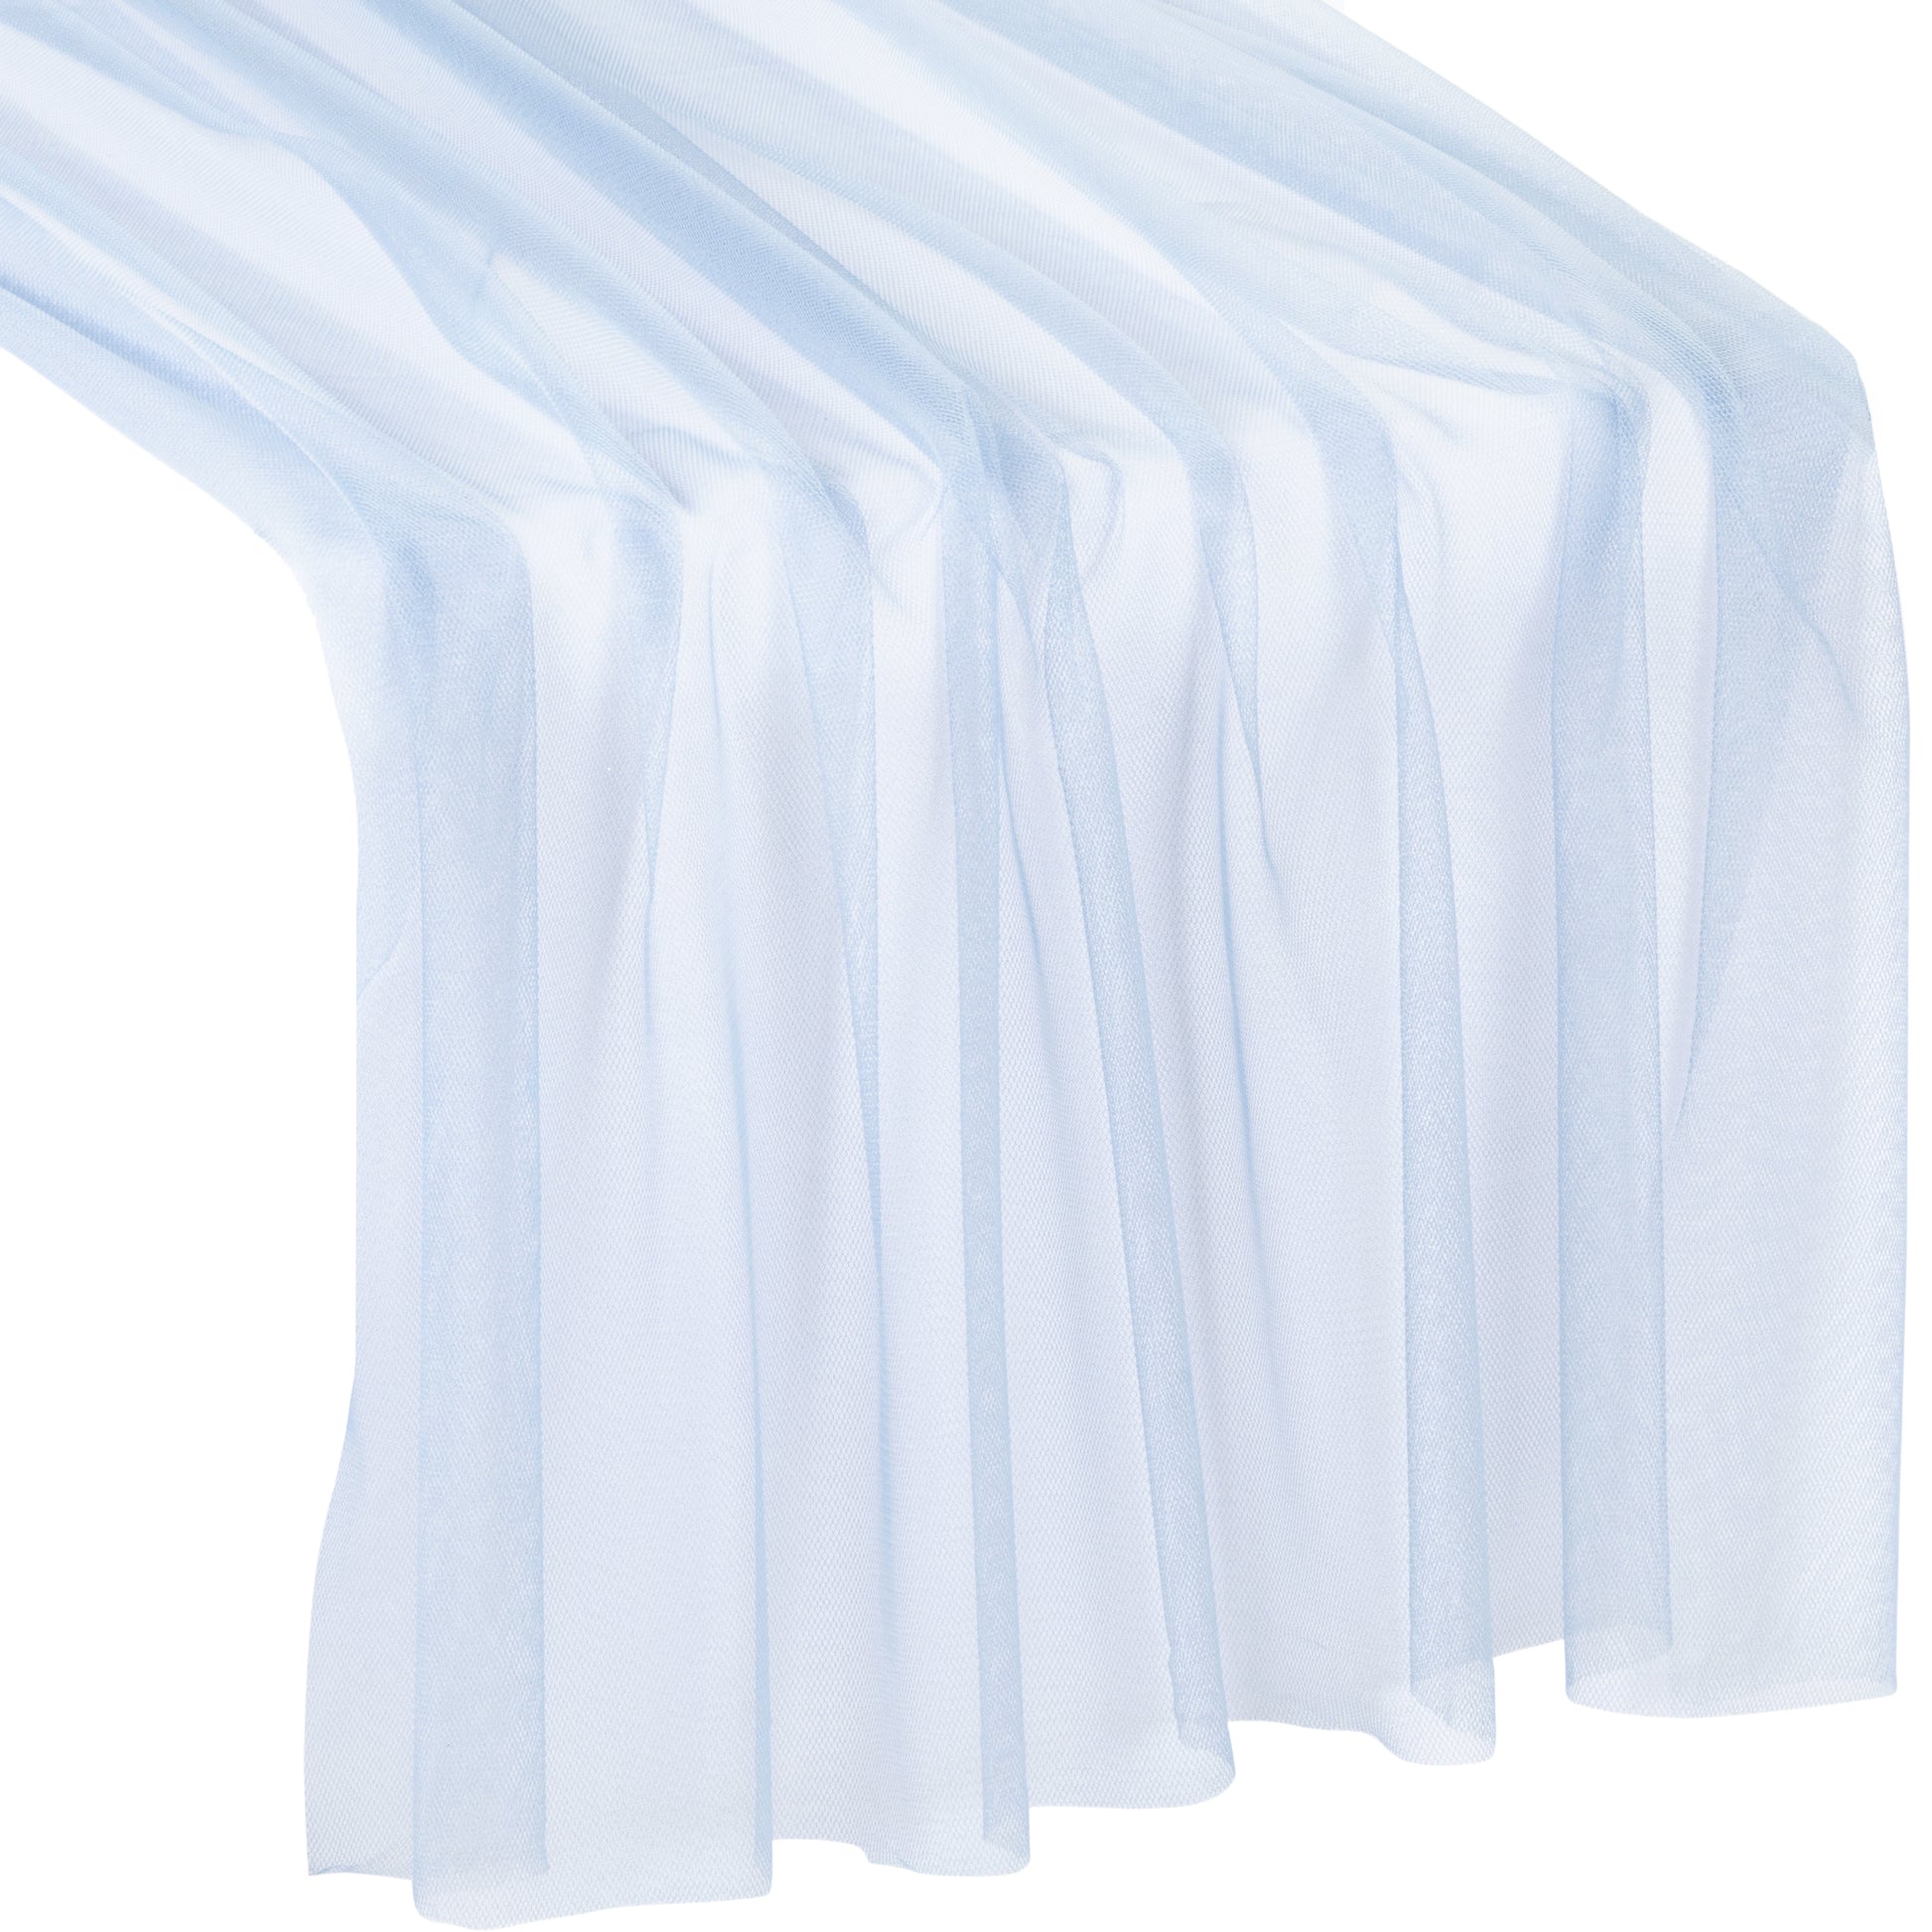 Soft Tulle Table Runner Extra Long 30" x 16ft - Dusty Blue